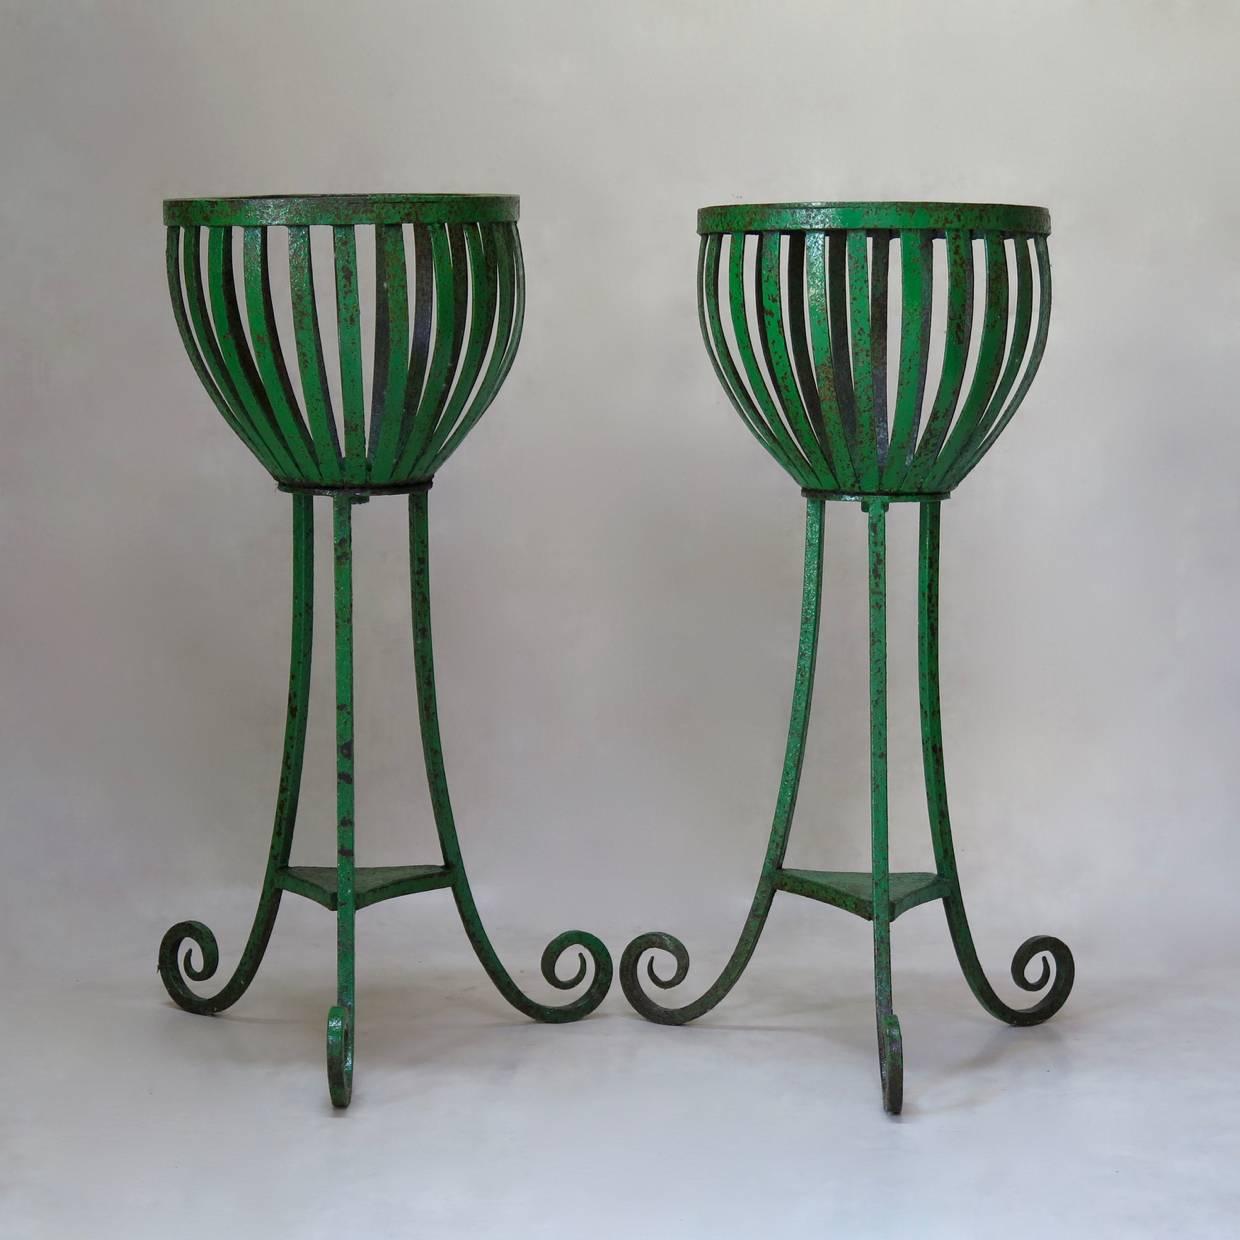 Elegant and sturdy pair of wrought iron planters with original green paint, raised on a tripod base ending in scrolled feet.